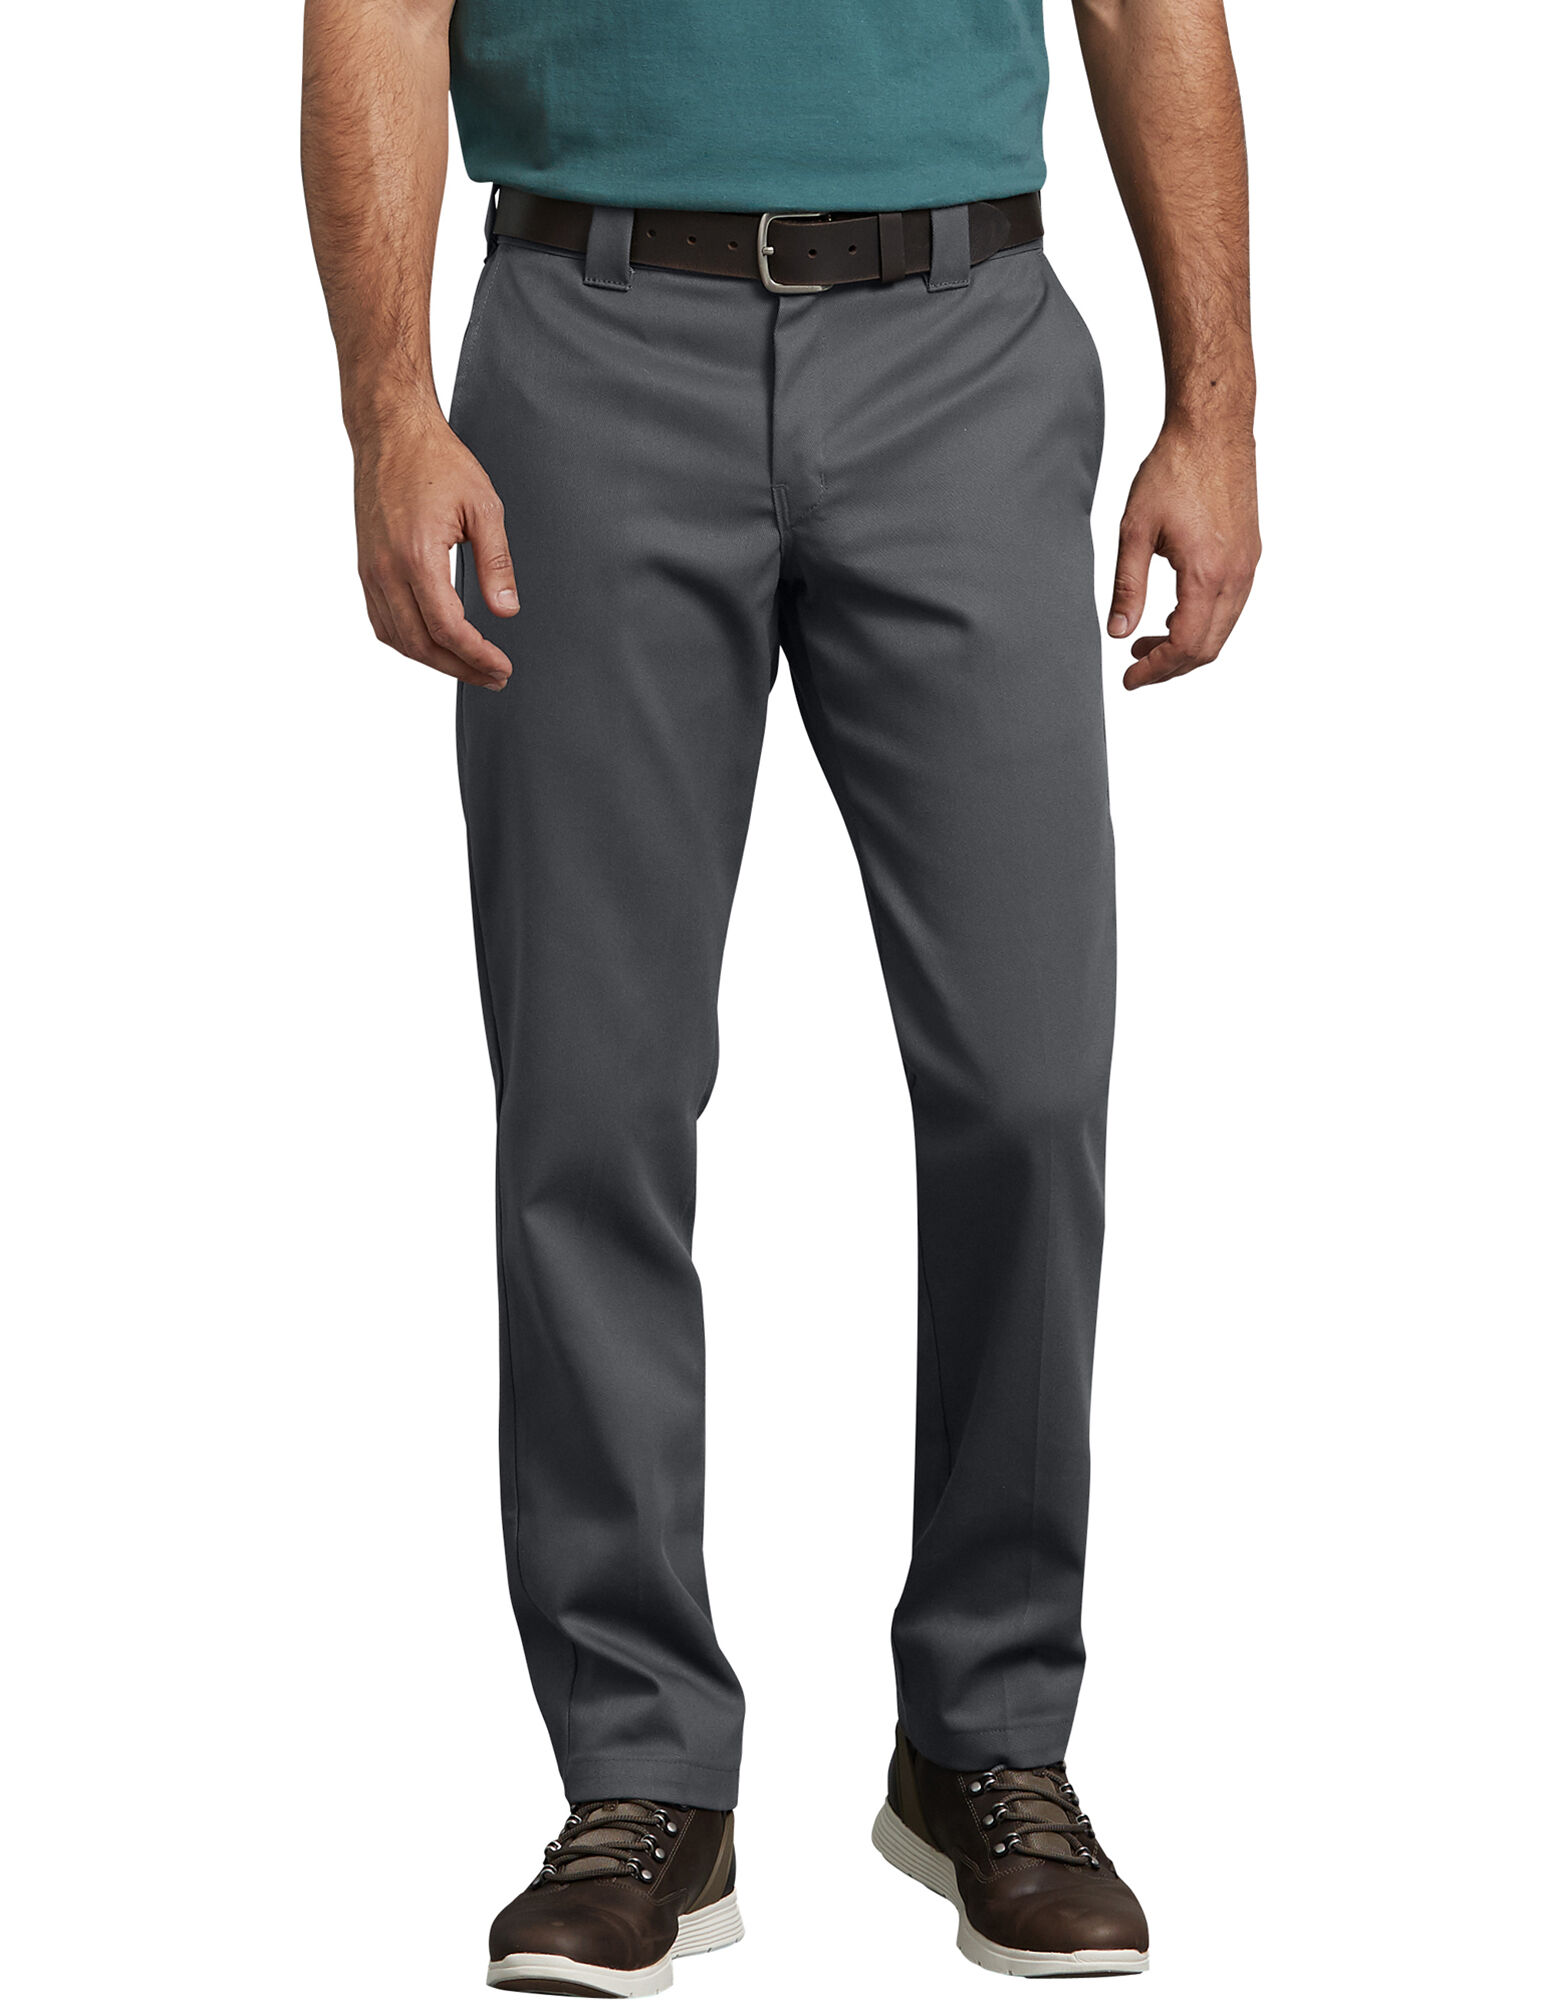 tapered cut trousers